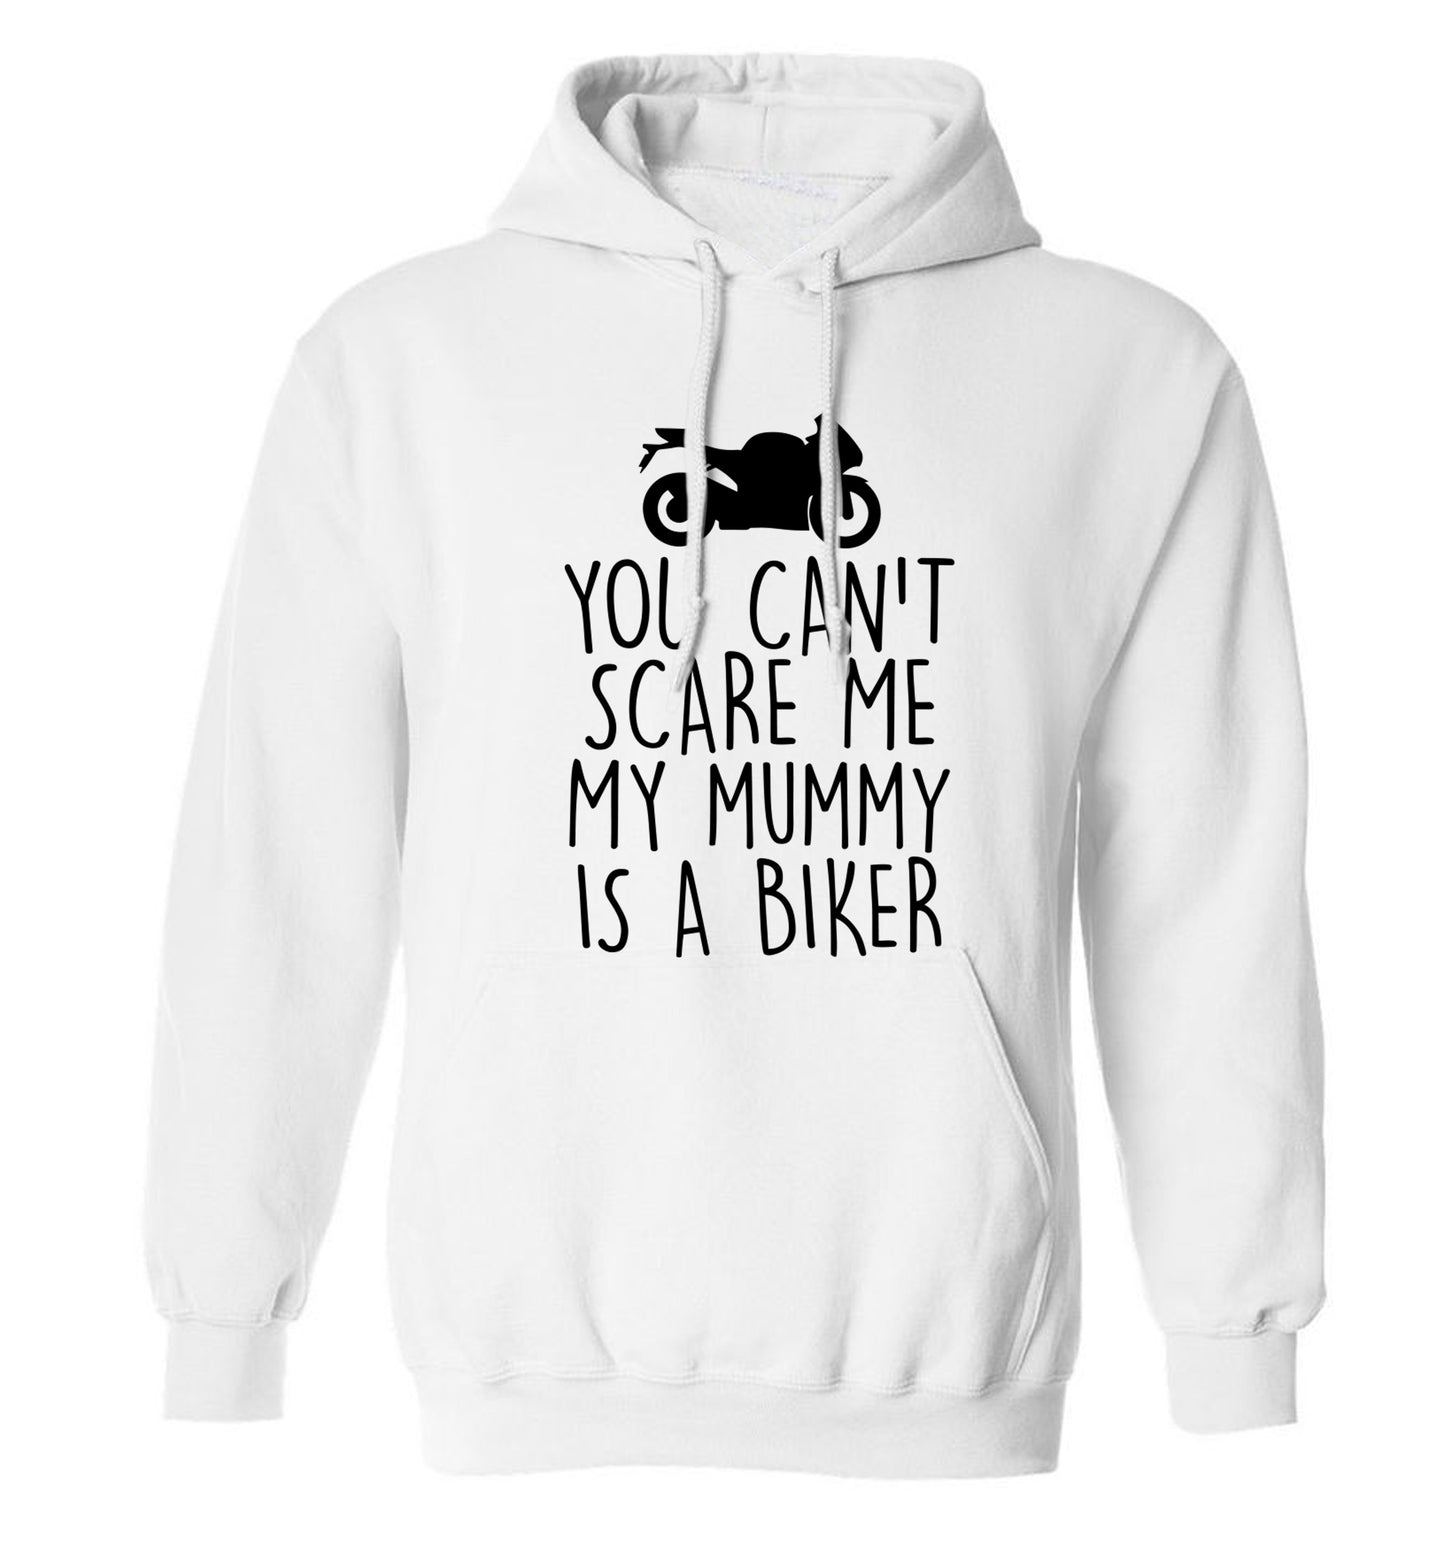 You can't scare me my mummy is a biker adults unisex white hoodie 2XL